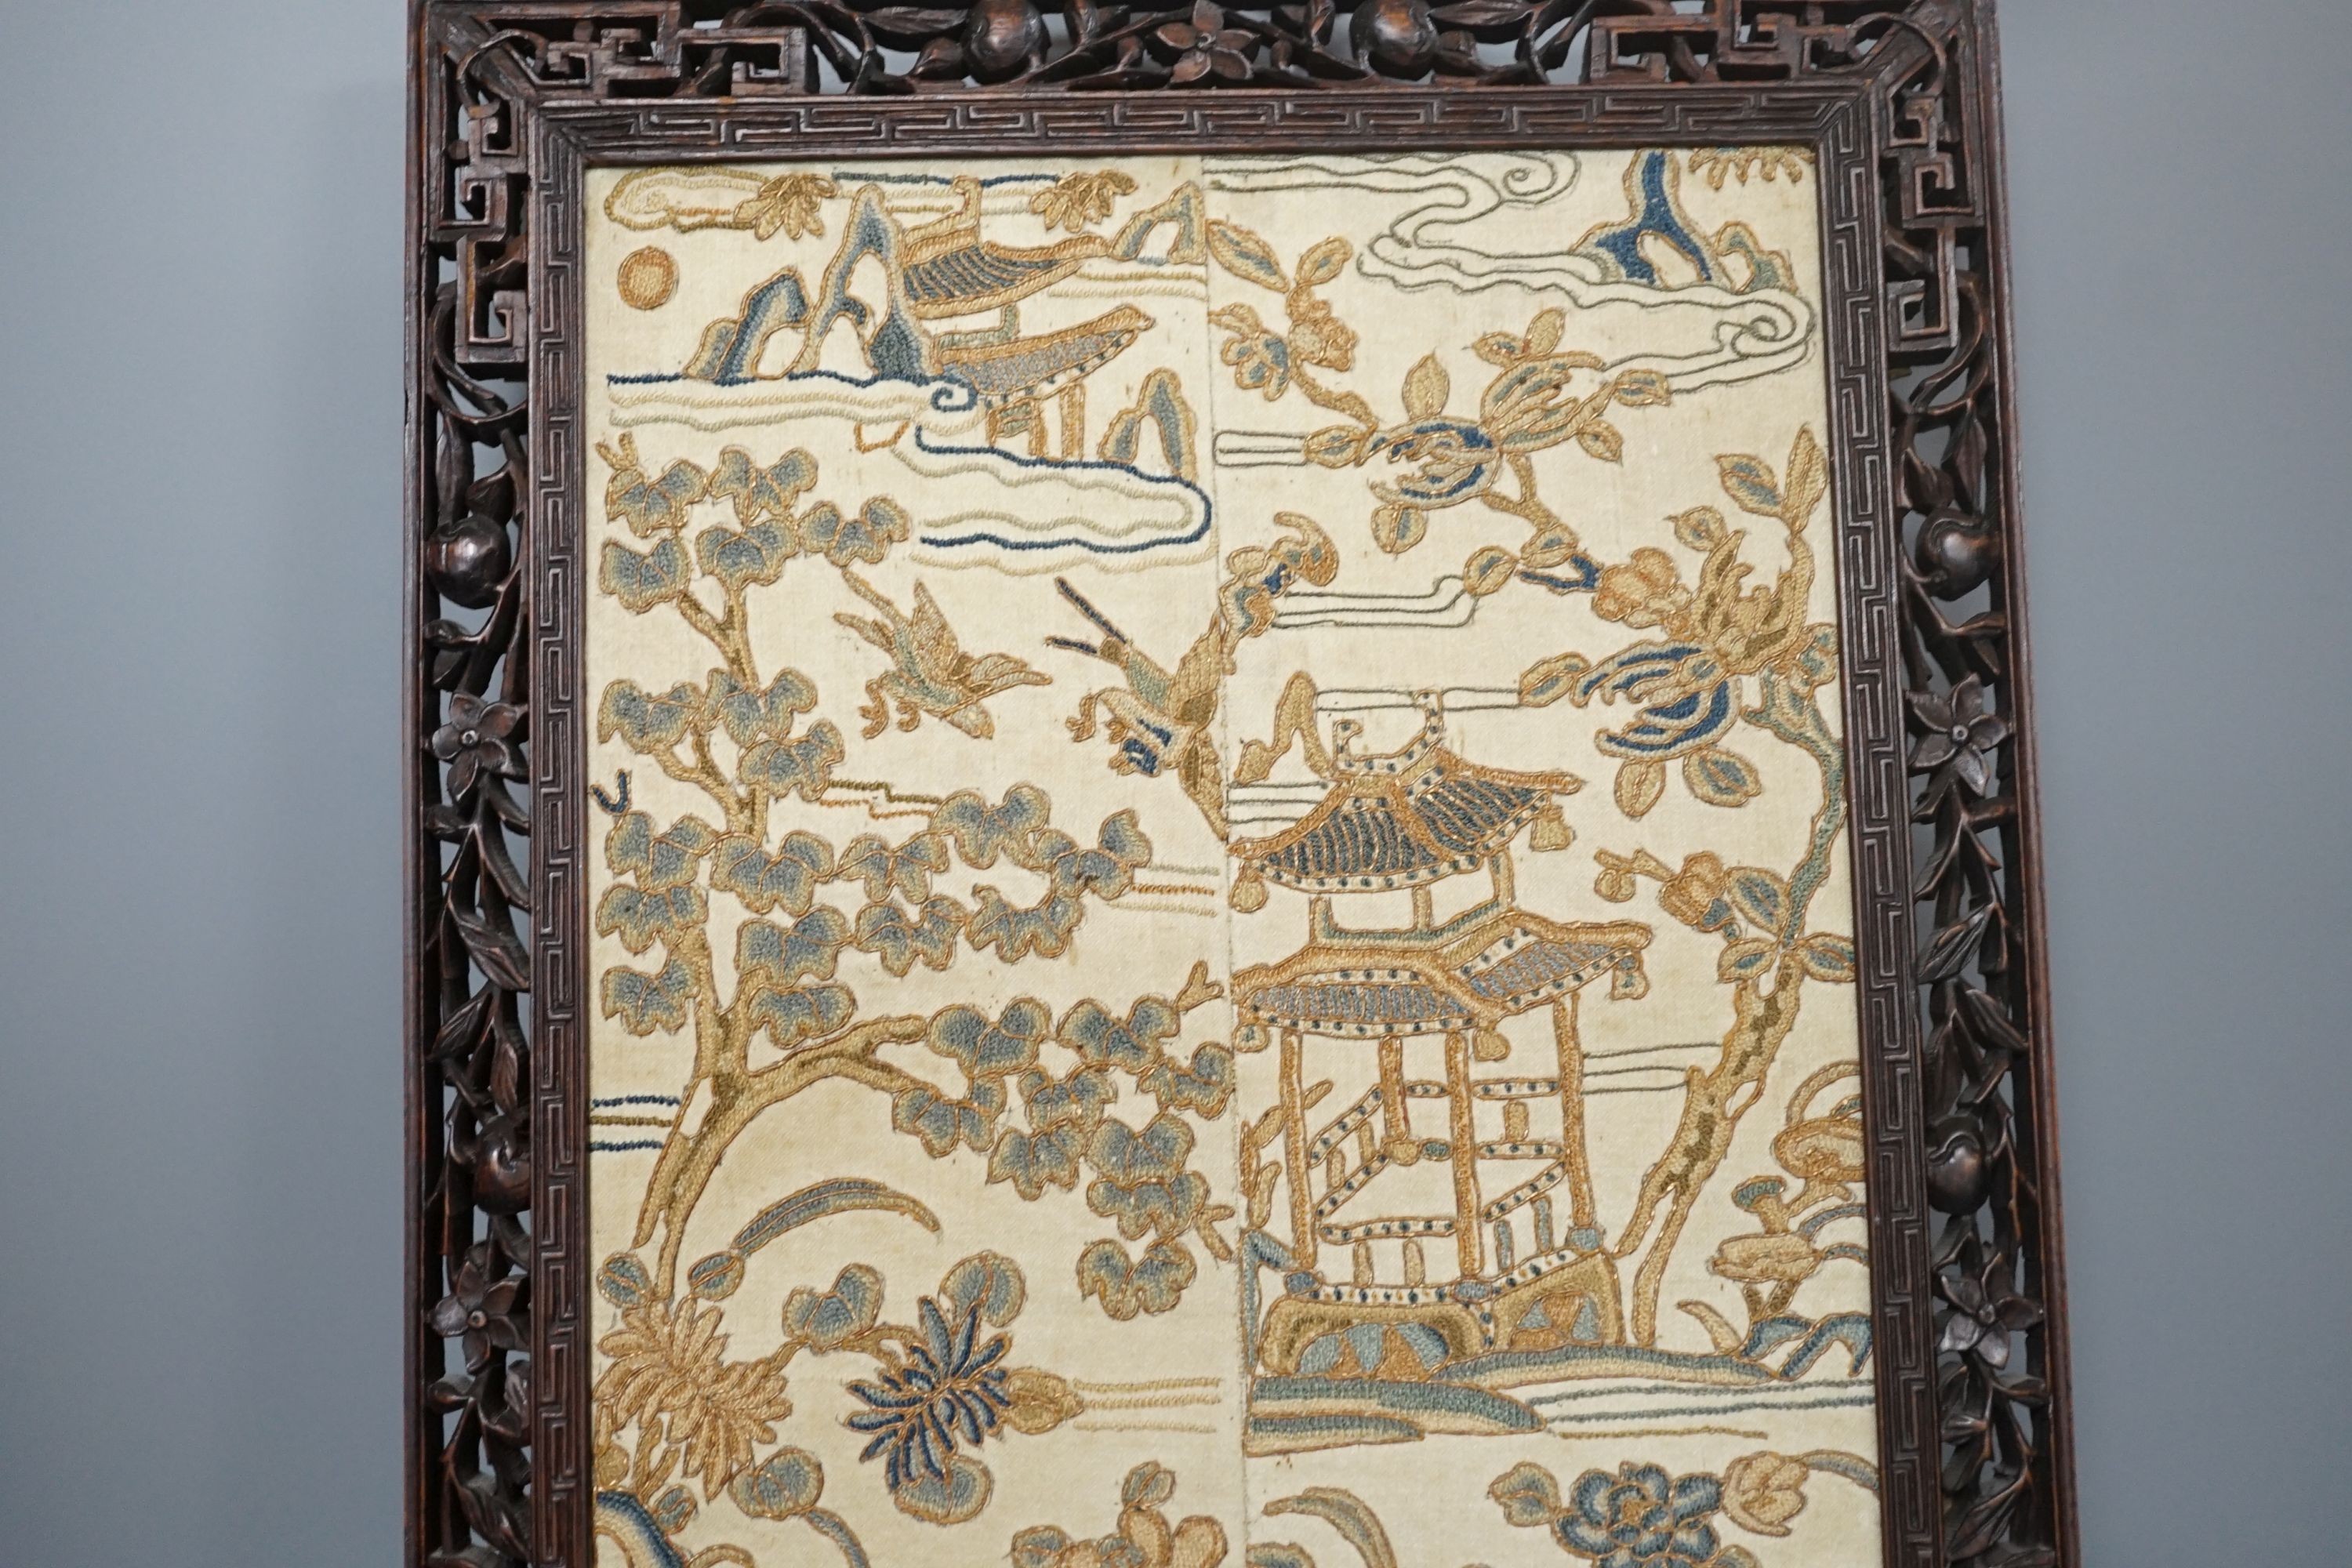 A pair of Chinese silk Beijing knot embroidered sleeve bands in a carved rosewood frame, 22 cms wide x 58.5 cms high, including frame.